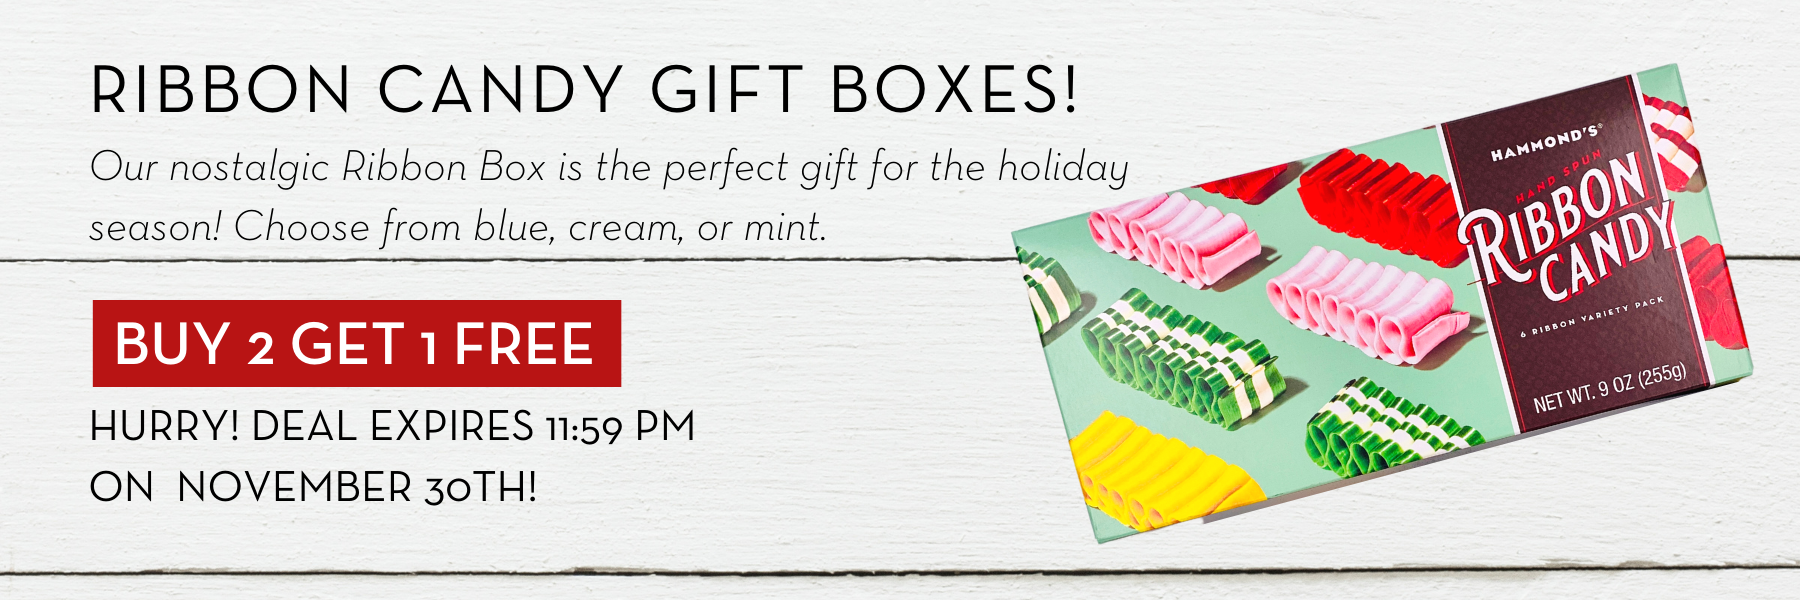 Ribbon Candy Gift Boxes! Buy 2 Get 1 Free! Our nostalgic Ribbon Box is the perfect gift for the holiday season! Choose from blue, cream or mint. 